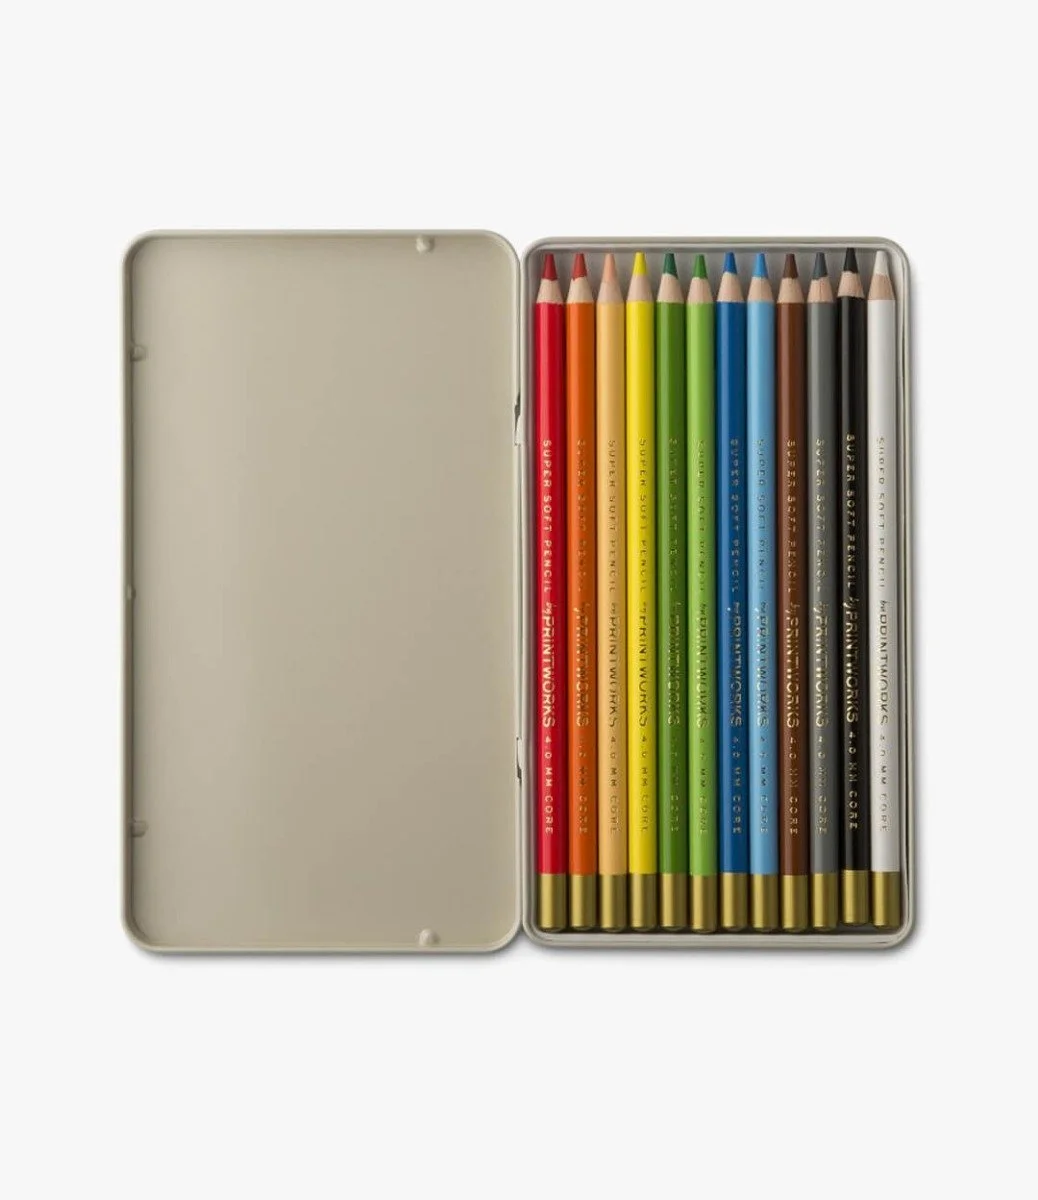 12 Classic Color Pencils by Printworks